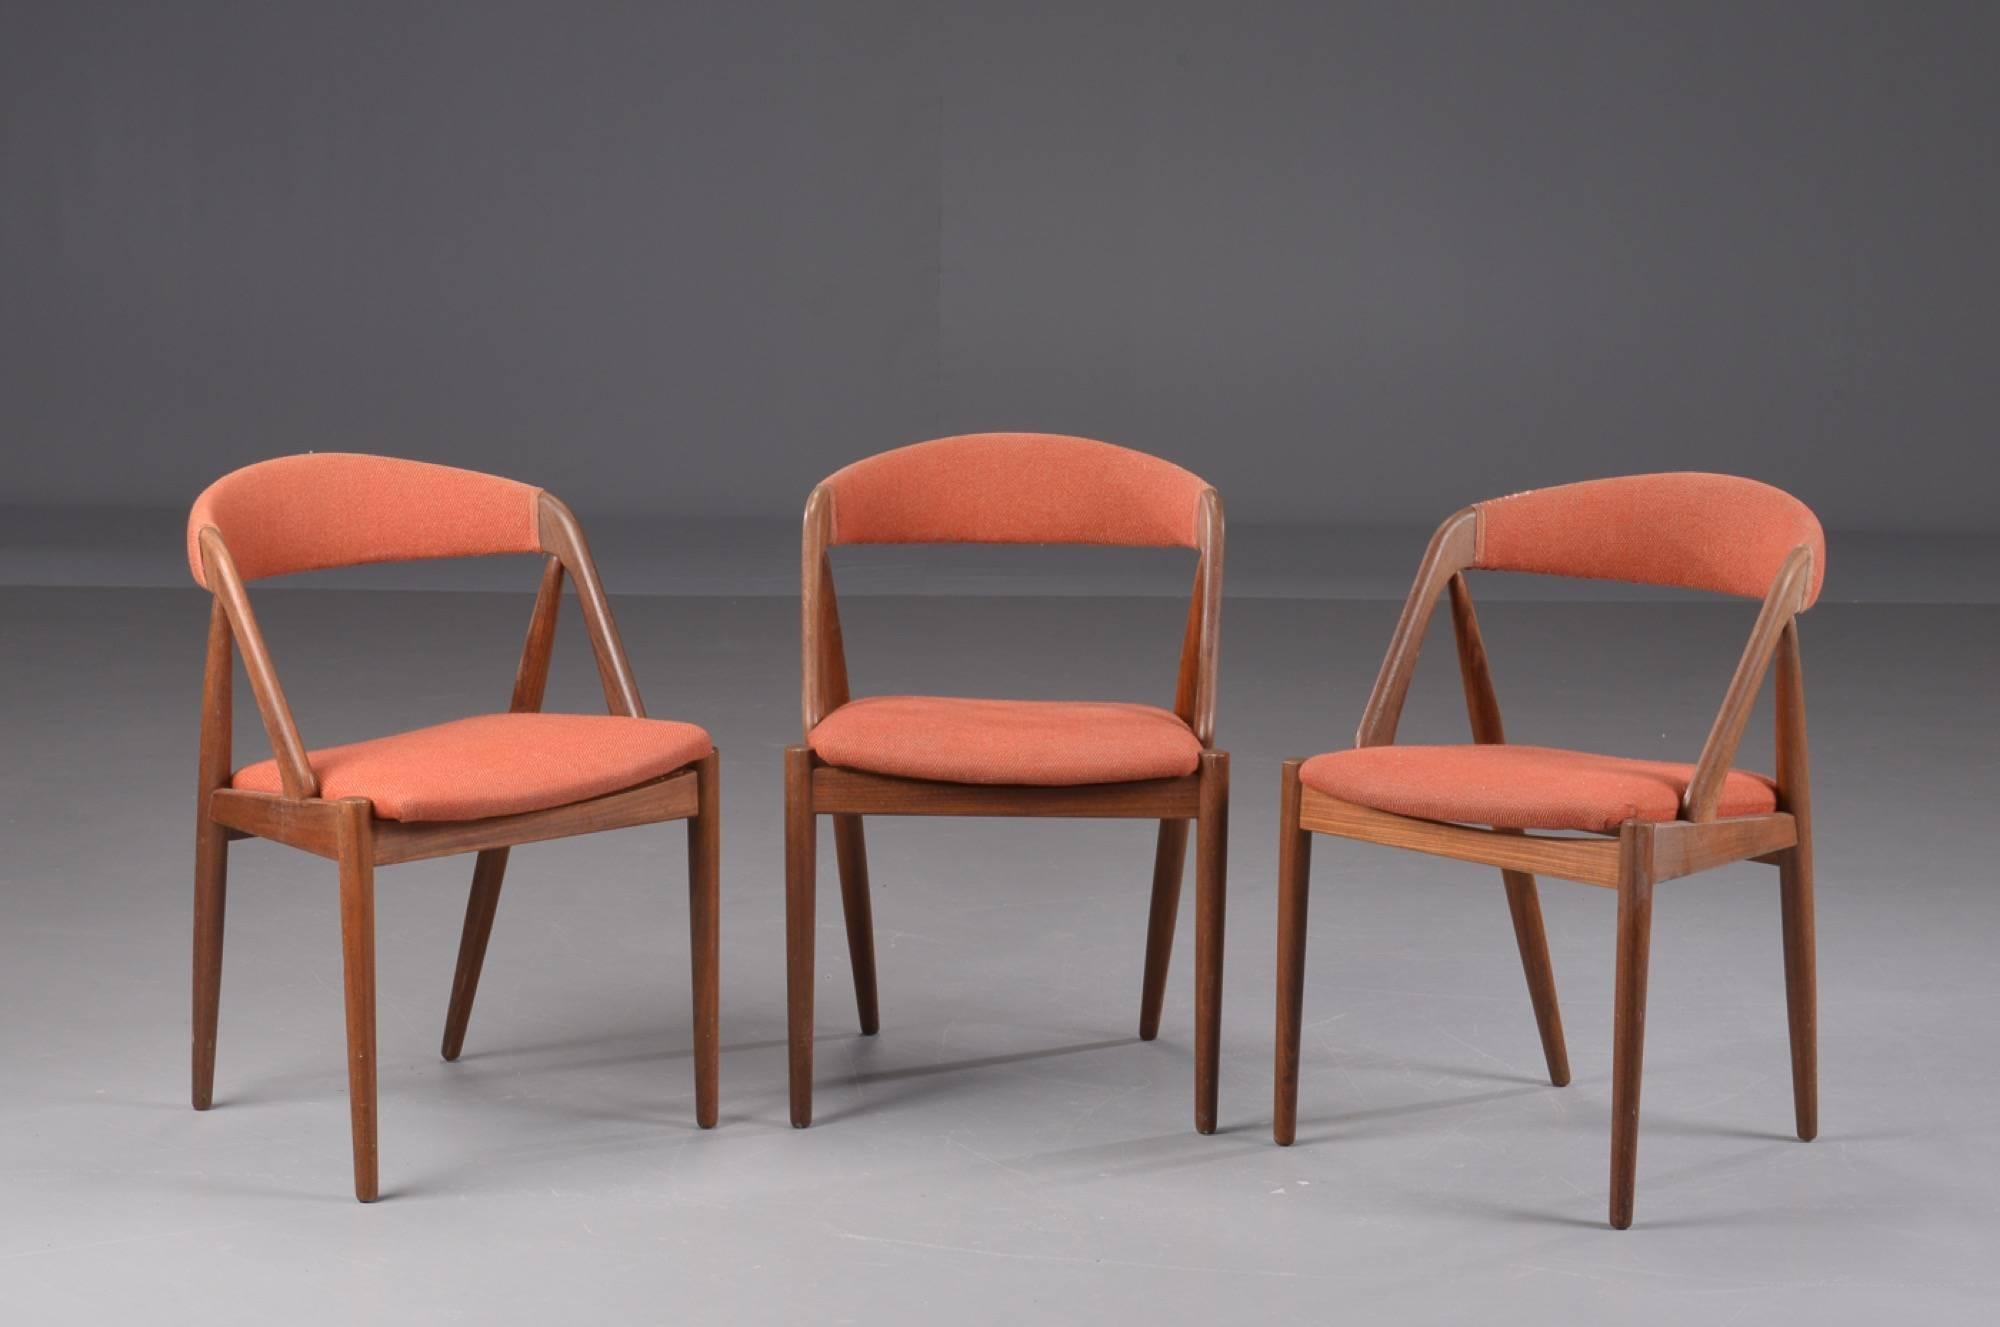 Three A-frame model 31 chairs designed by Kai Kristiansen for Schou-Andersens Møbelfabrik. Set of fined teak wood. Seat and back upholstered with red fabric.